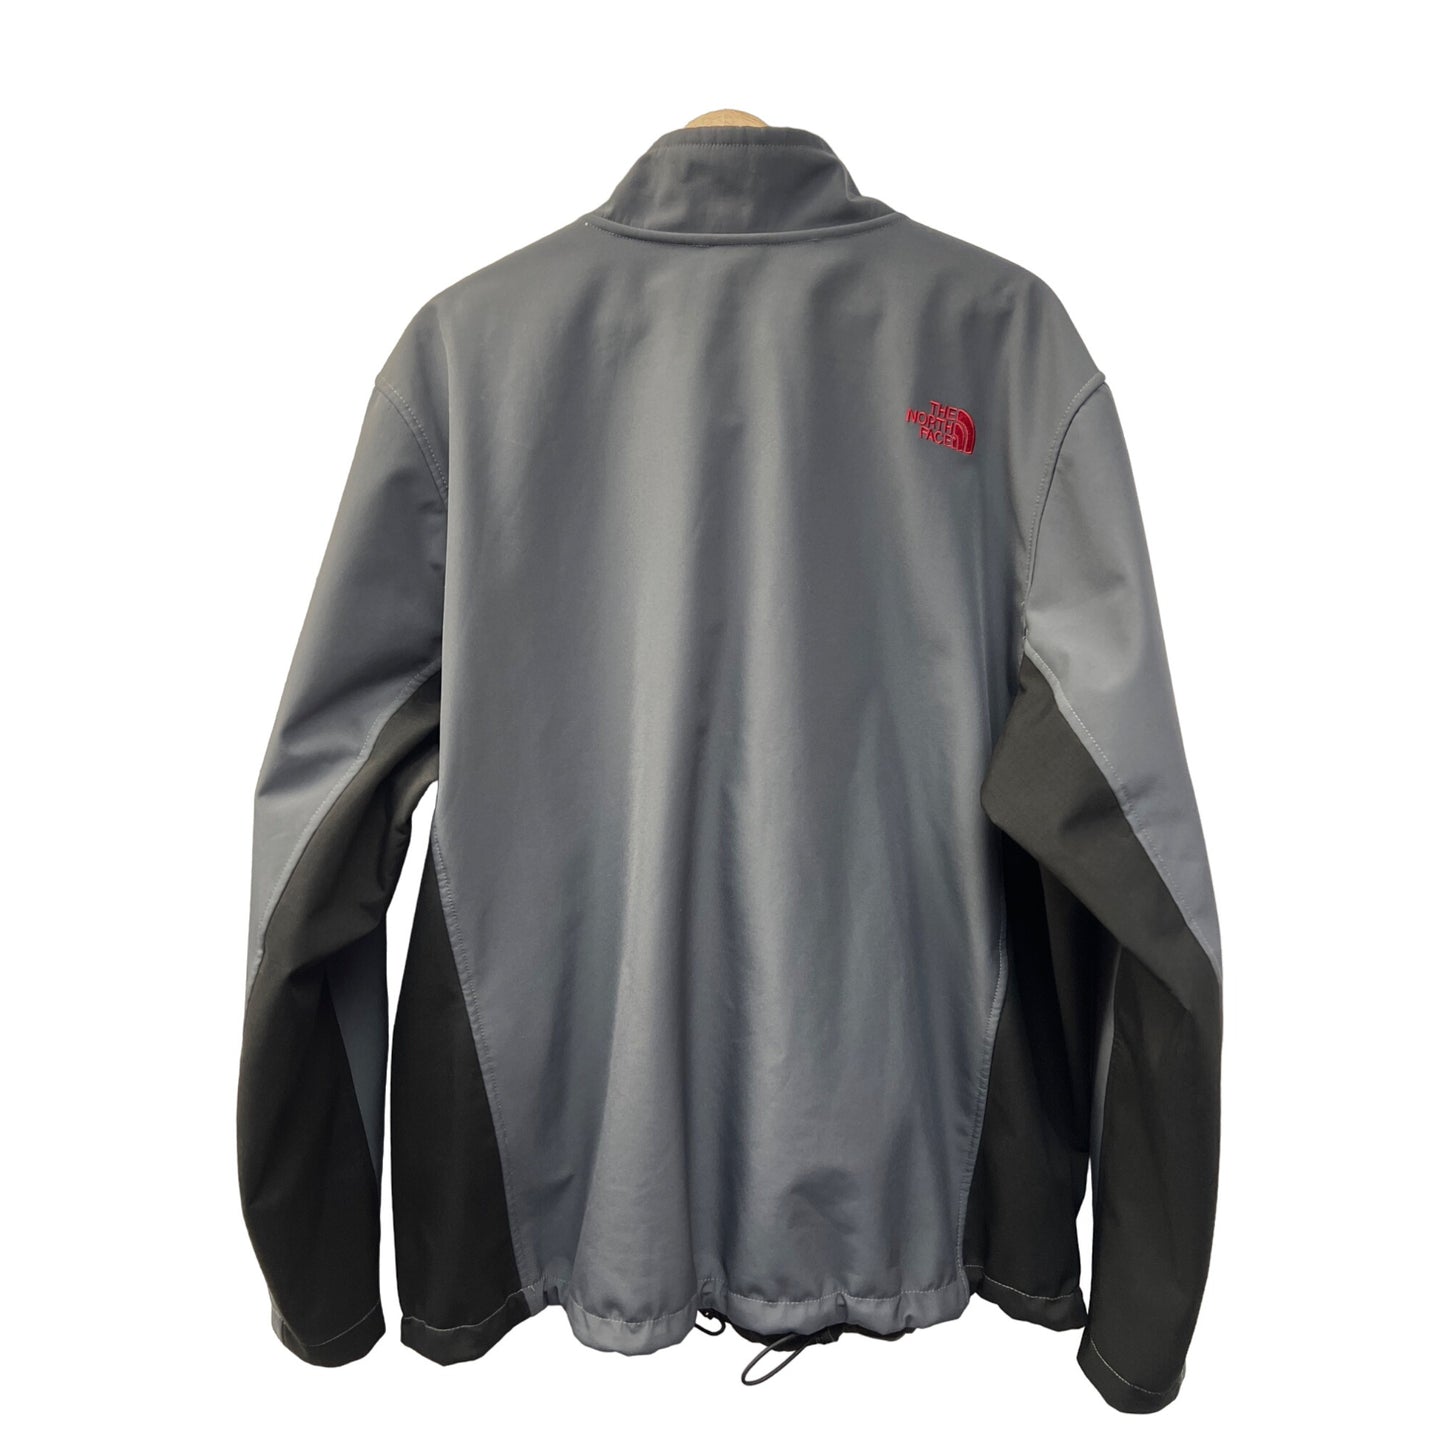 The North Face Softshell Full Zip Fleece Lined Gray and Red Jacket